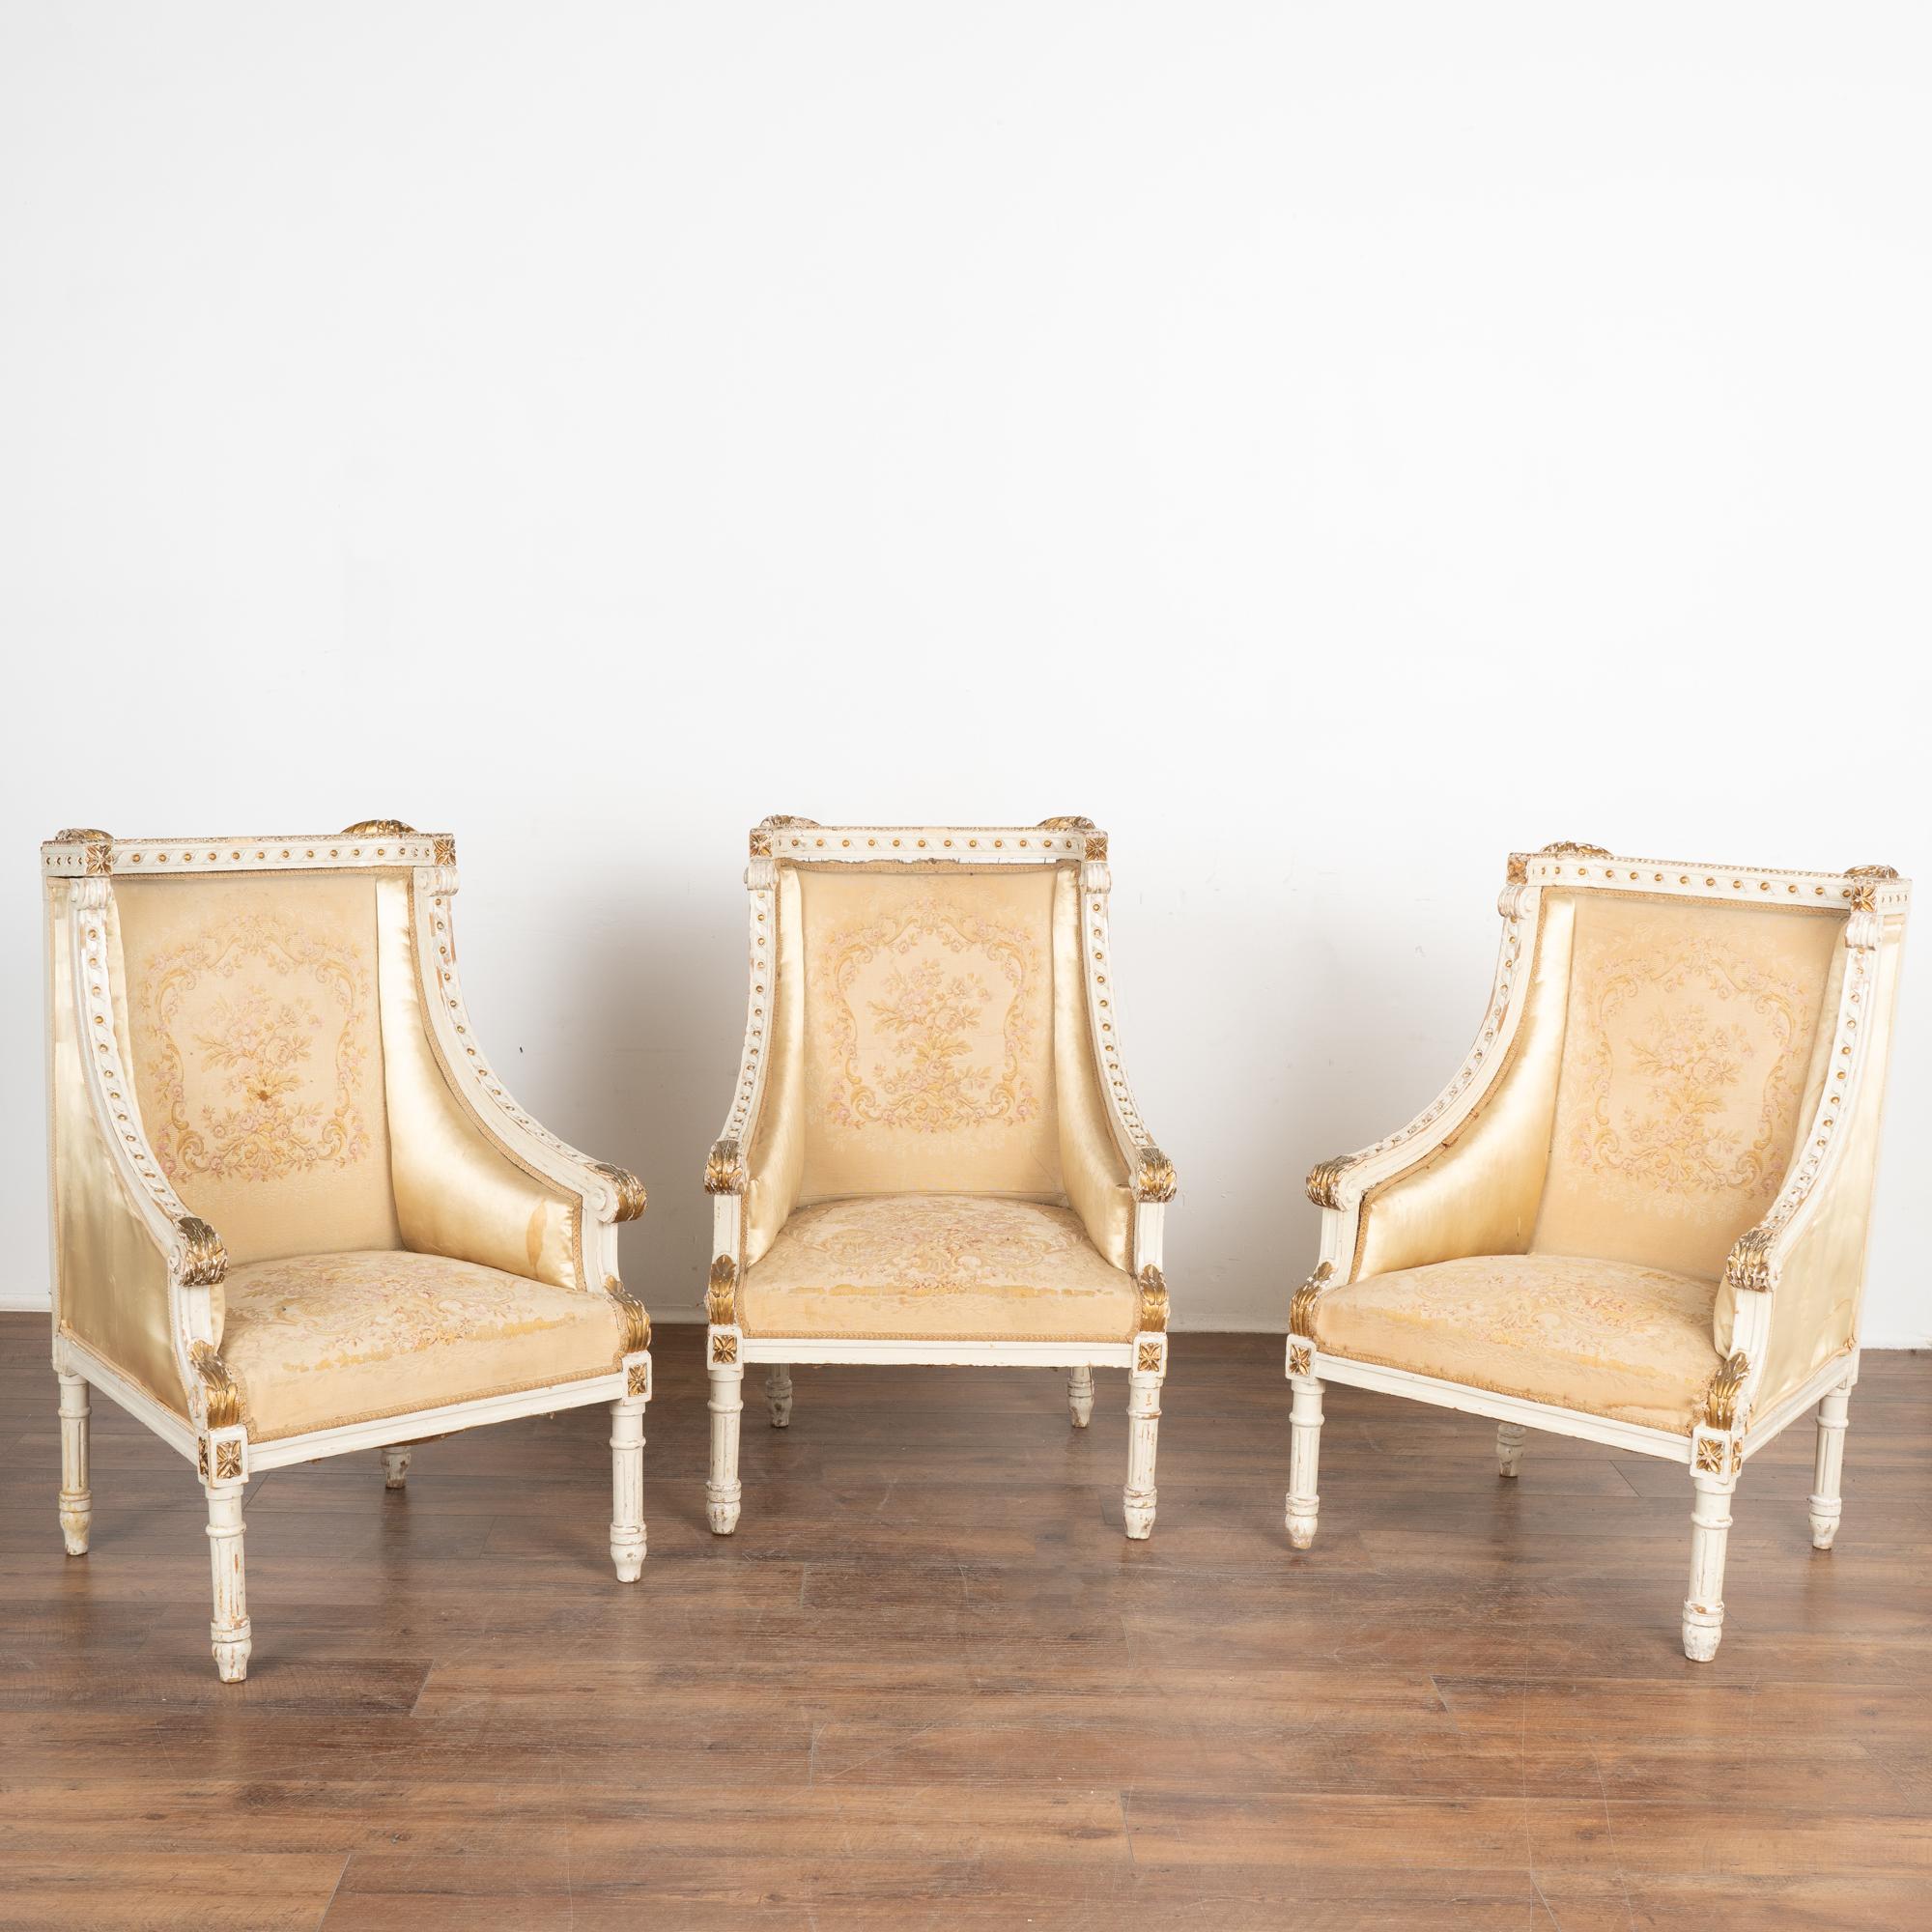 Set of three upholstered arm chairs from France with original white painted finish accented with gold trim.
Carved details throughout include acanthus leaves, braided trim with bead detail, turned fluted legs, and medallion accents.
Wood frame is